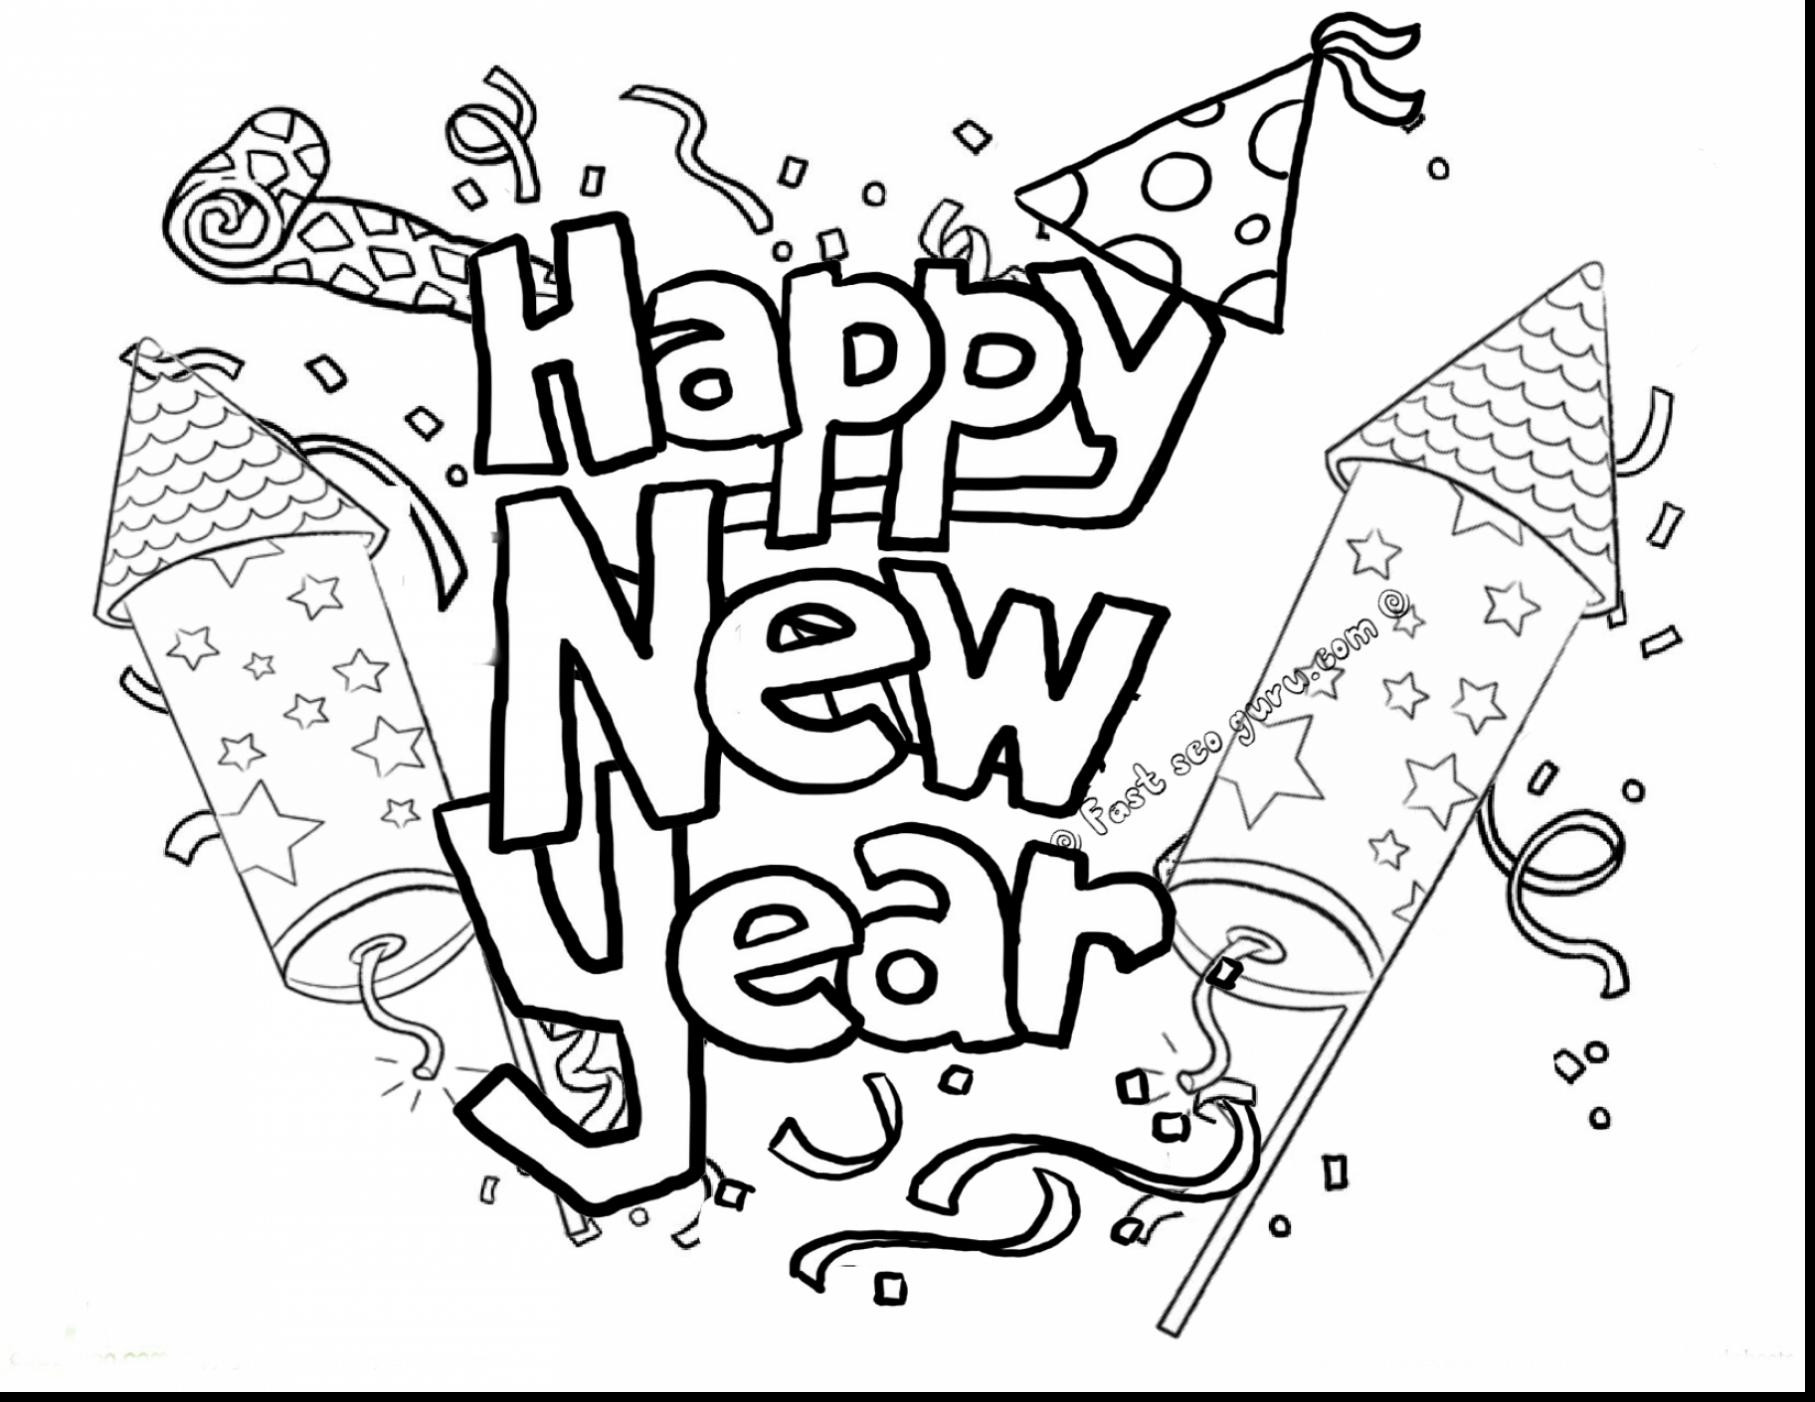 Lunar New Year Coloring Pages at Free printable